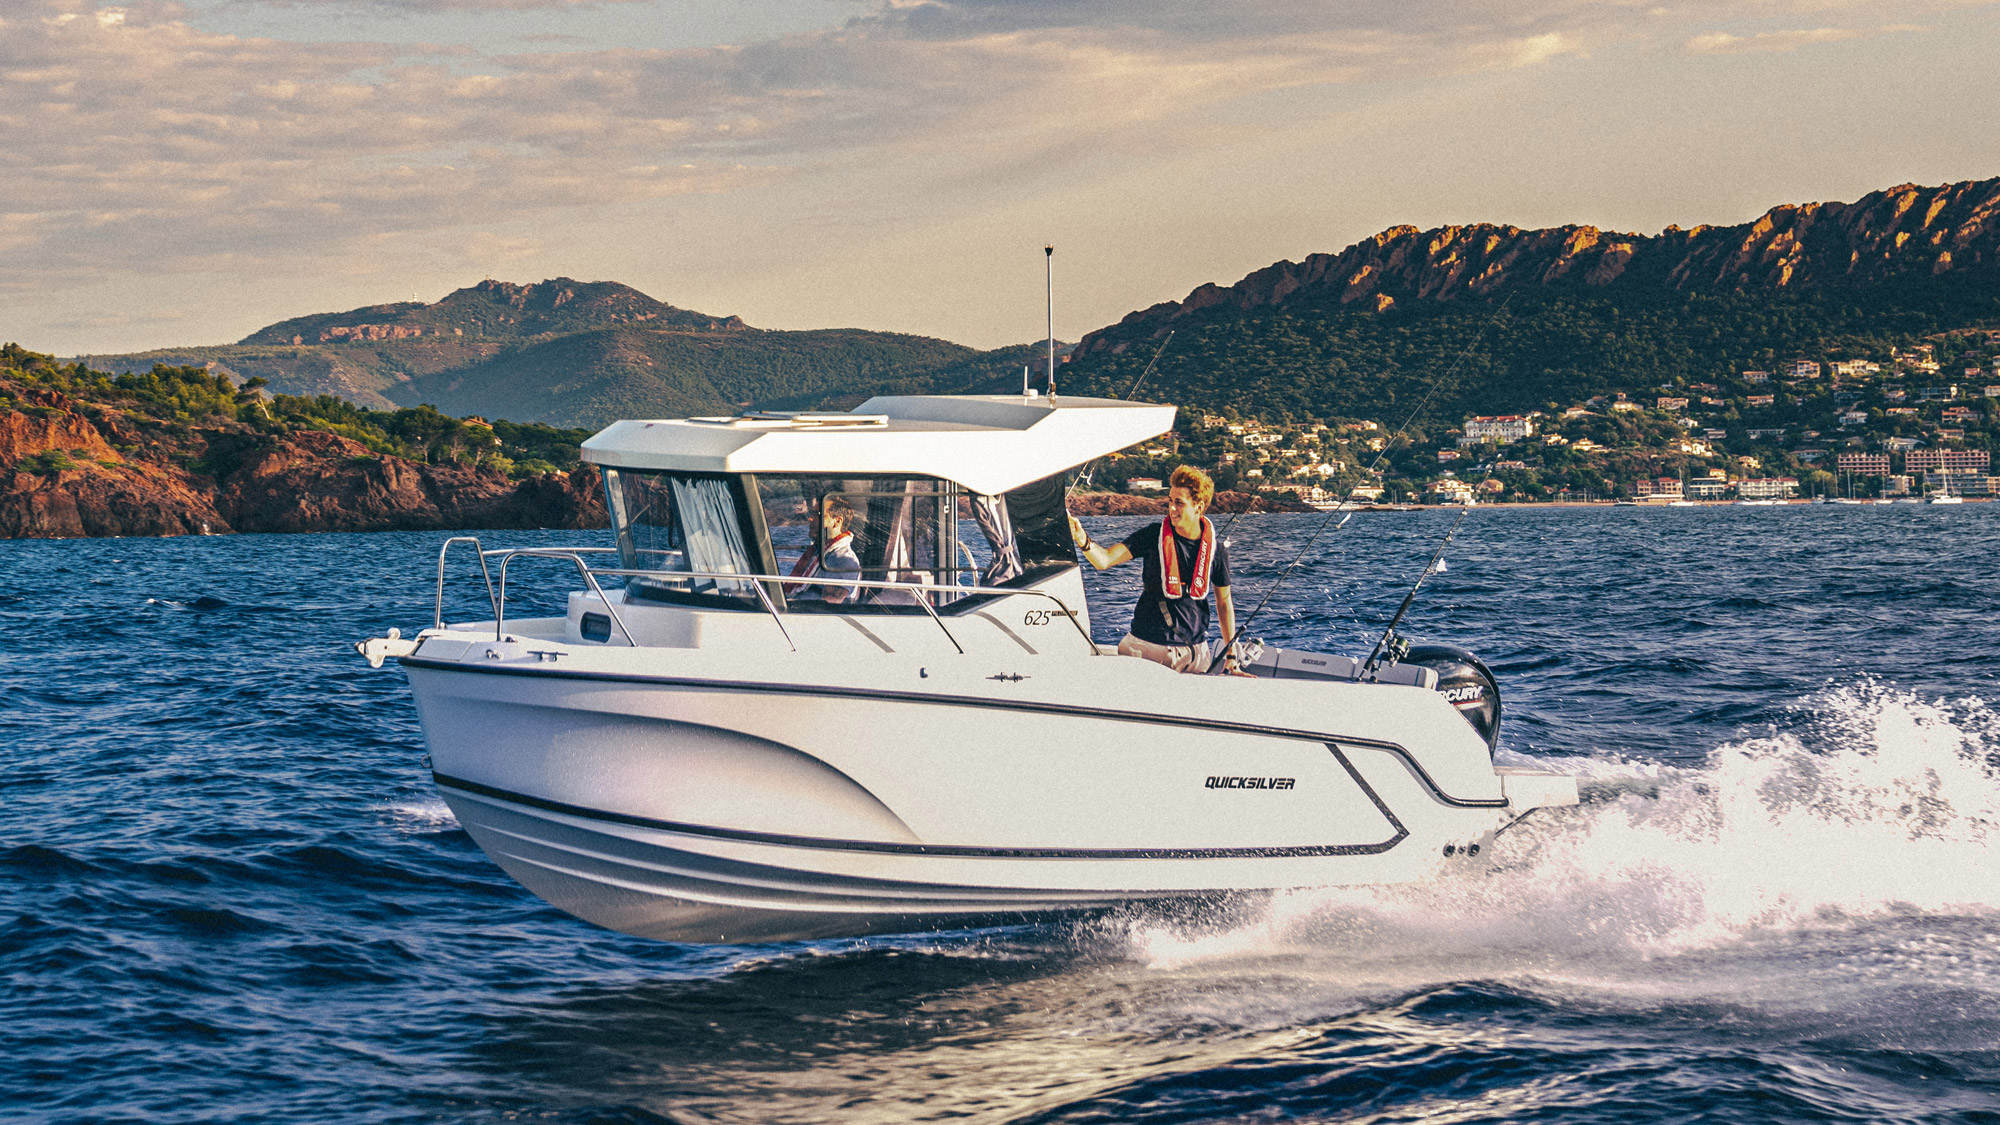 Introducing the All-New 625 Pilothouse Personal Fishing Craft